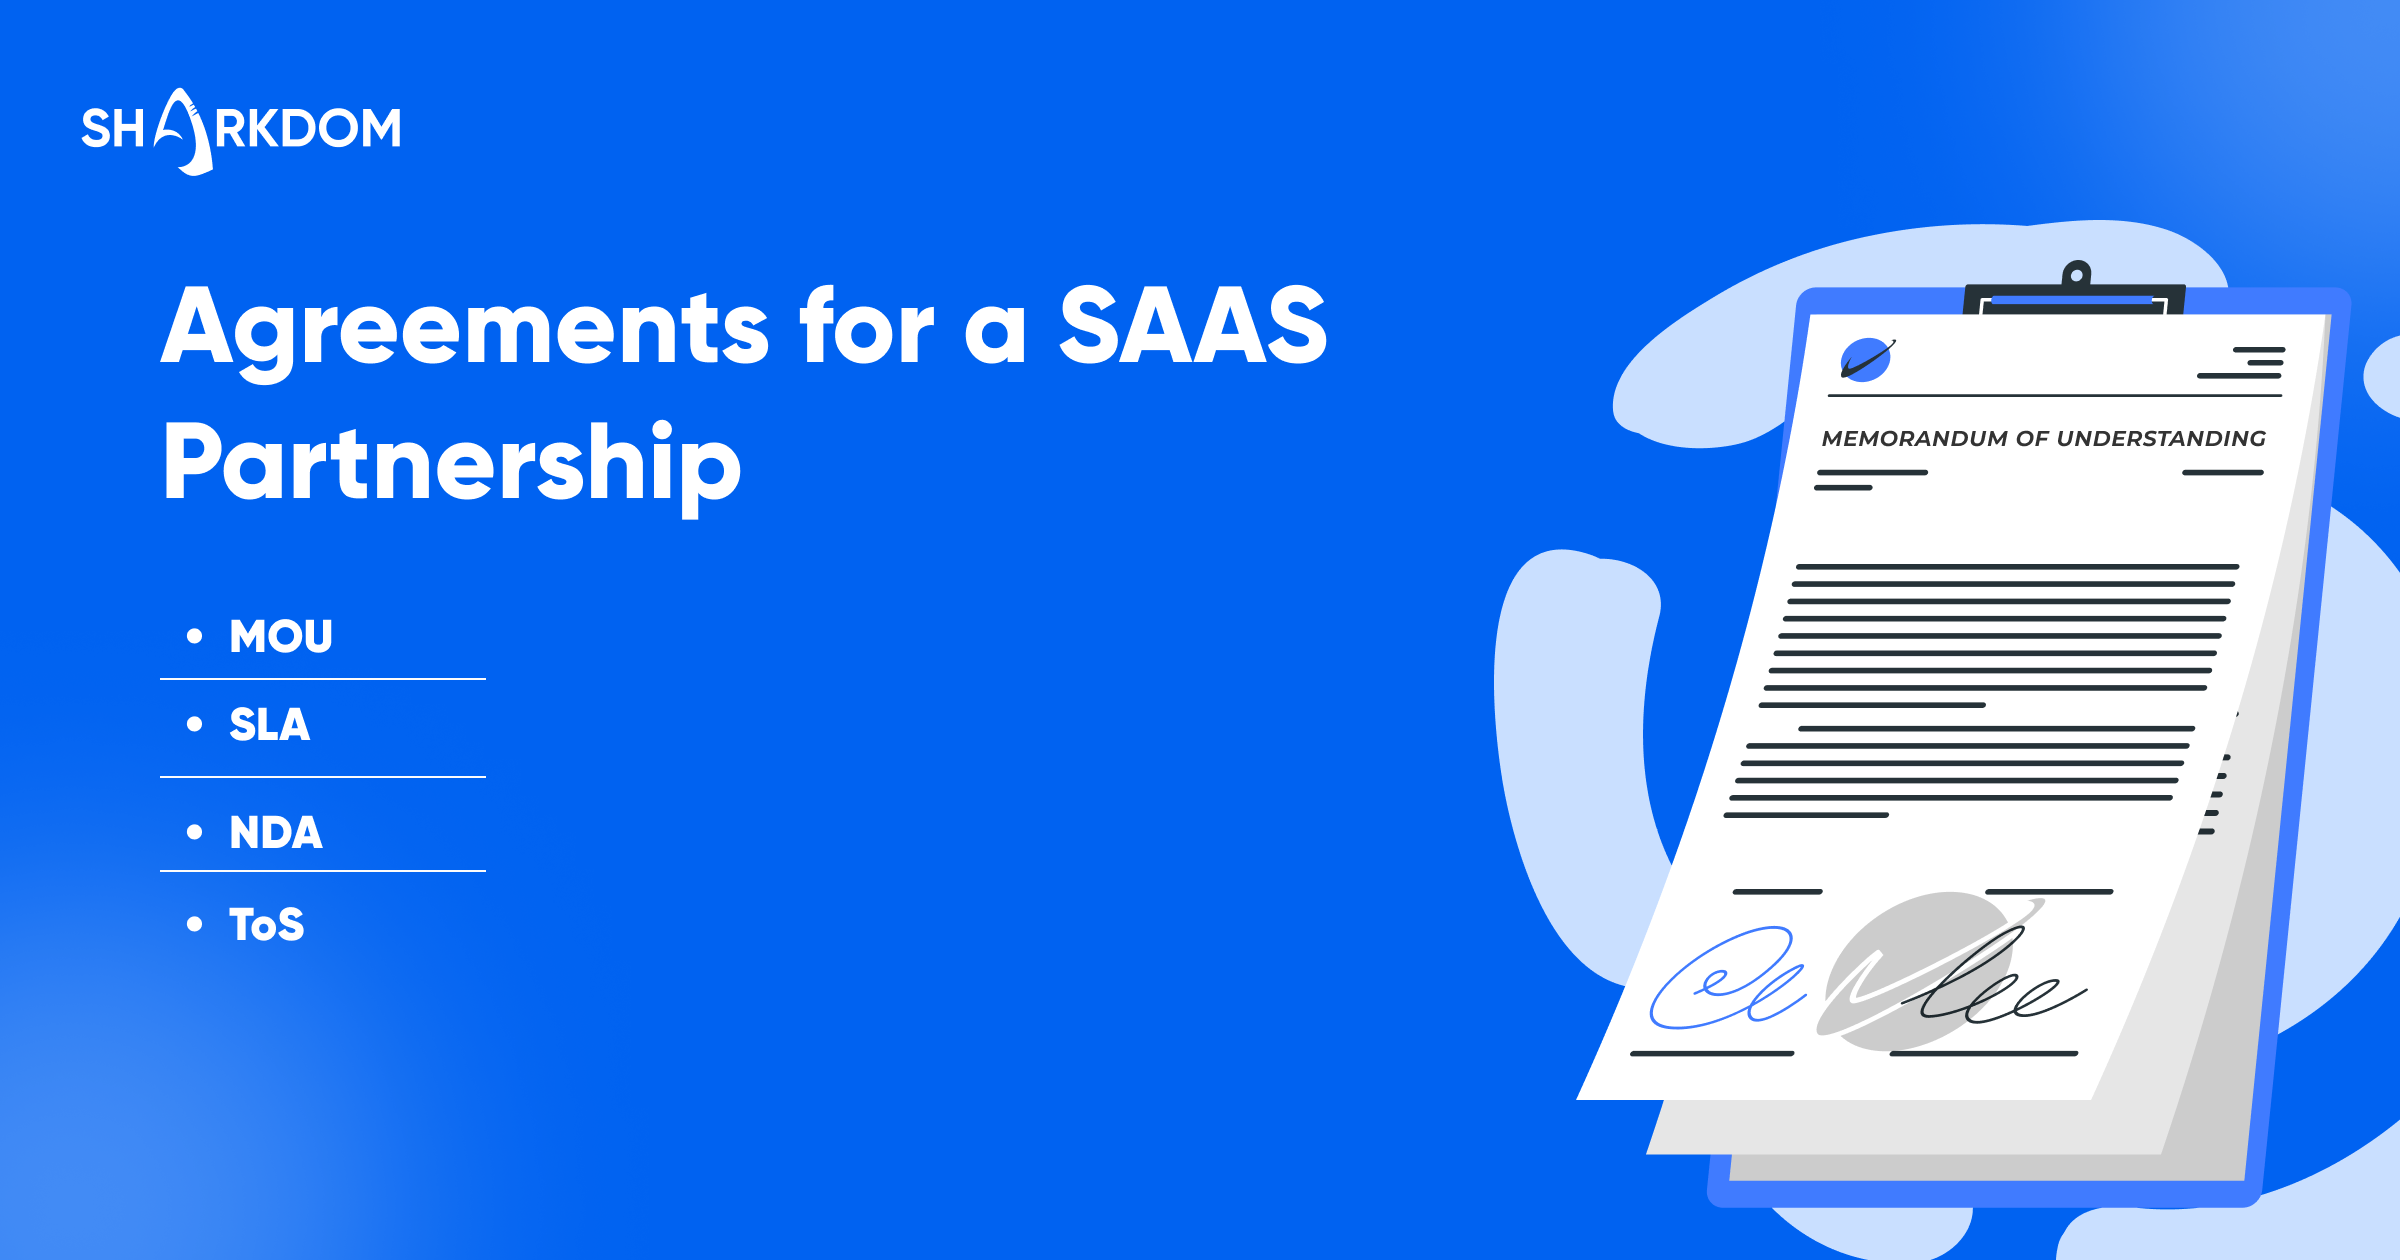 Apart from MOU's, Is their any other agreement needed for a SAAS Partnership?